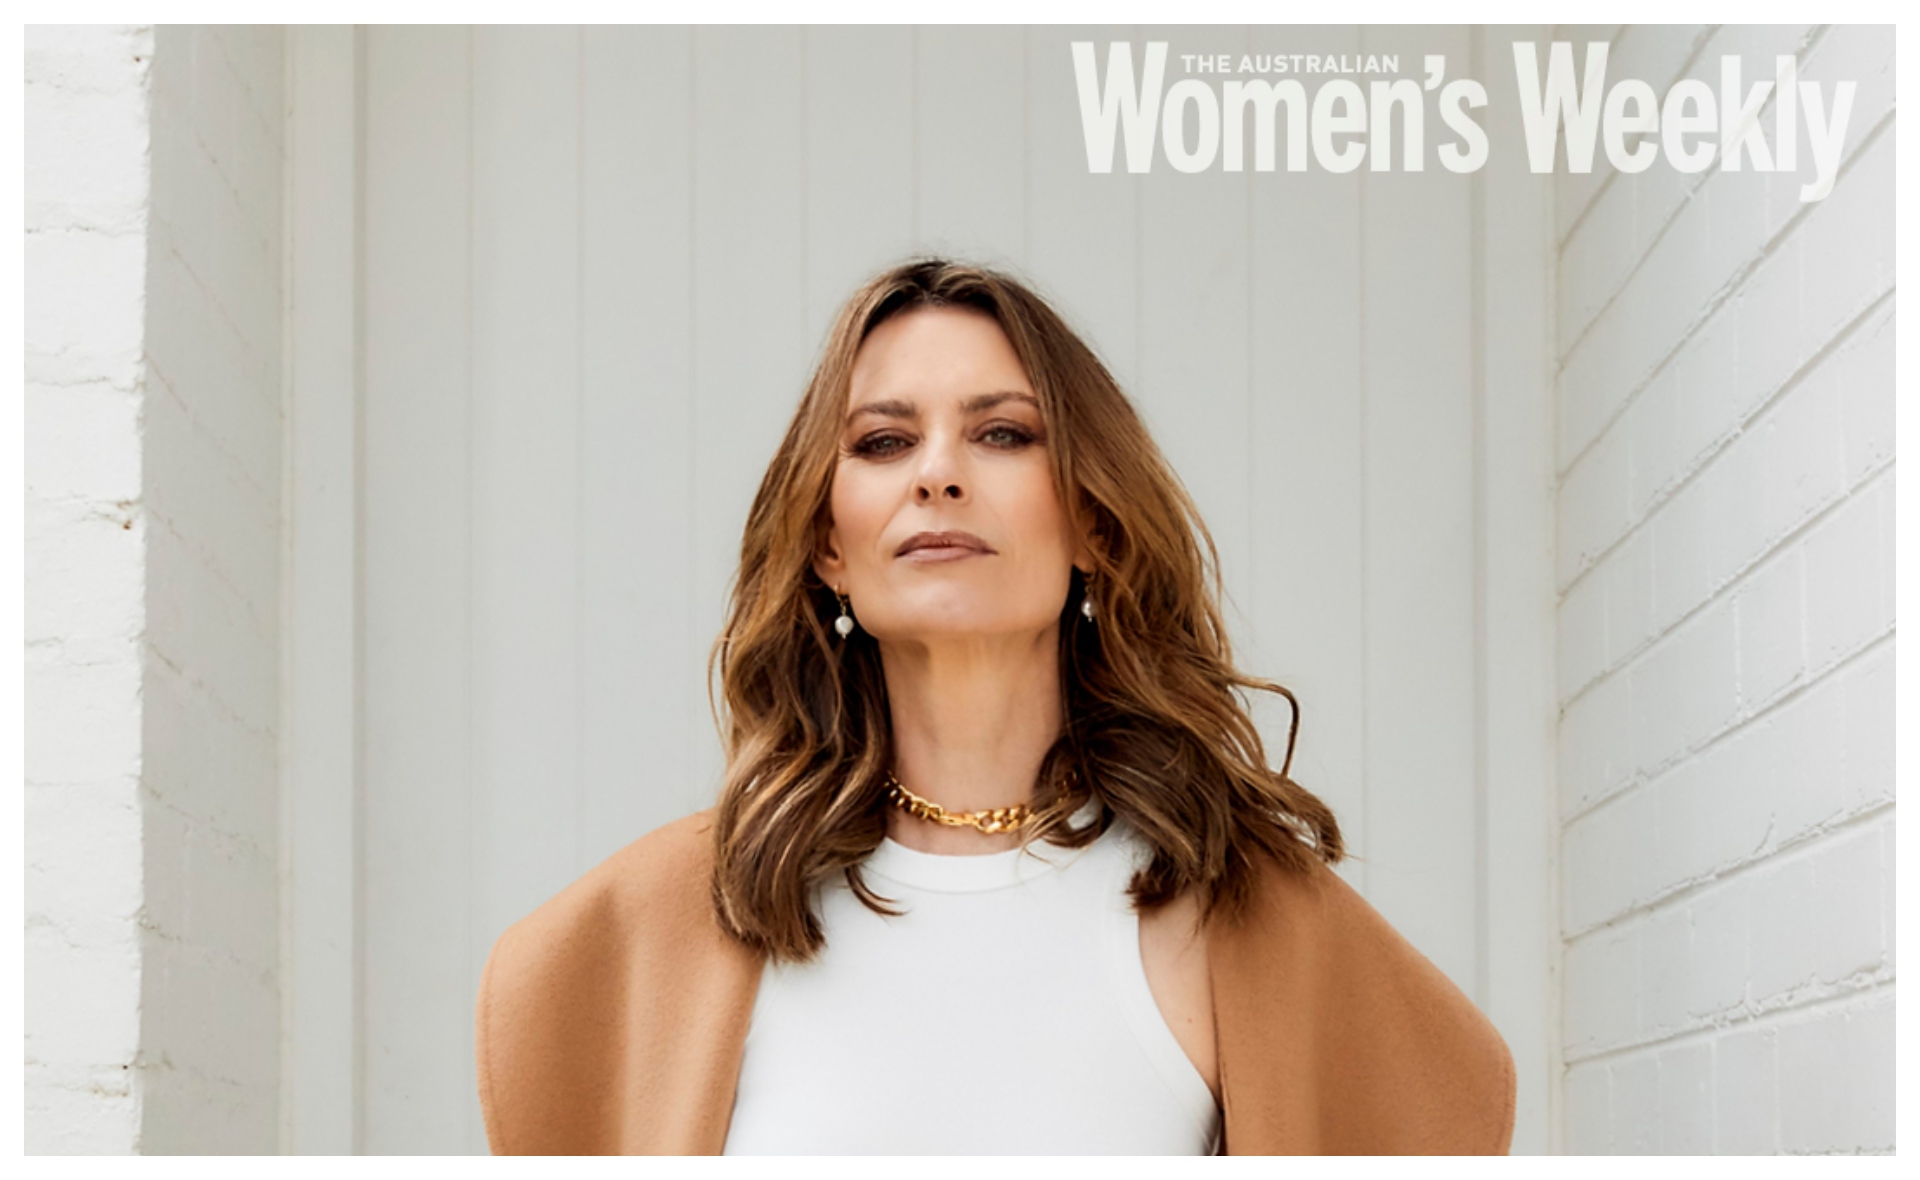 She’s experienced many of life’s twist and turns, but for TV star Kat Stewart, there is always a silver lining